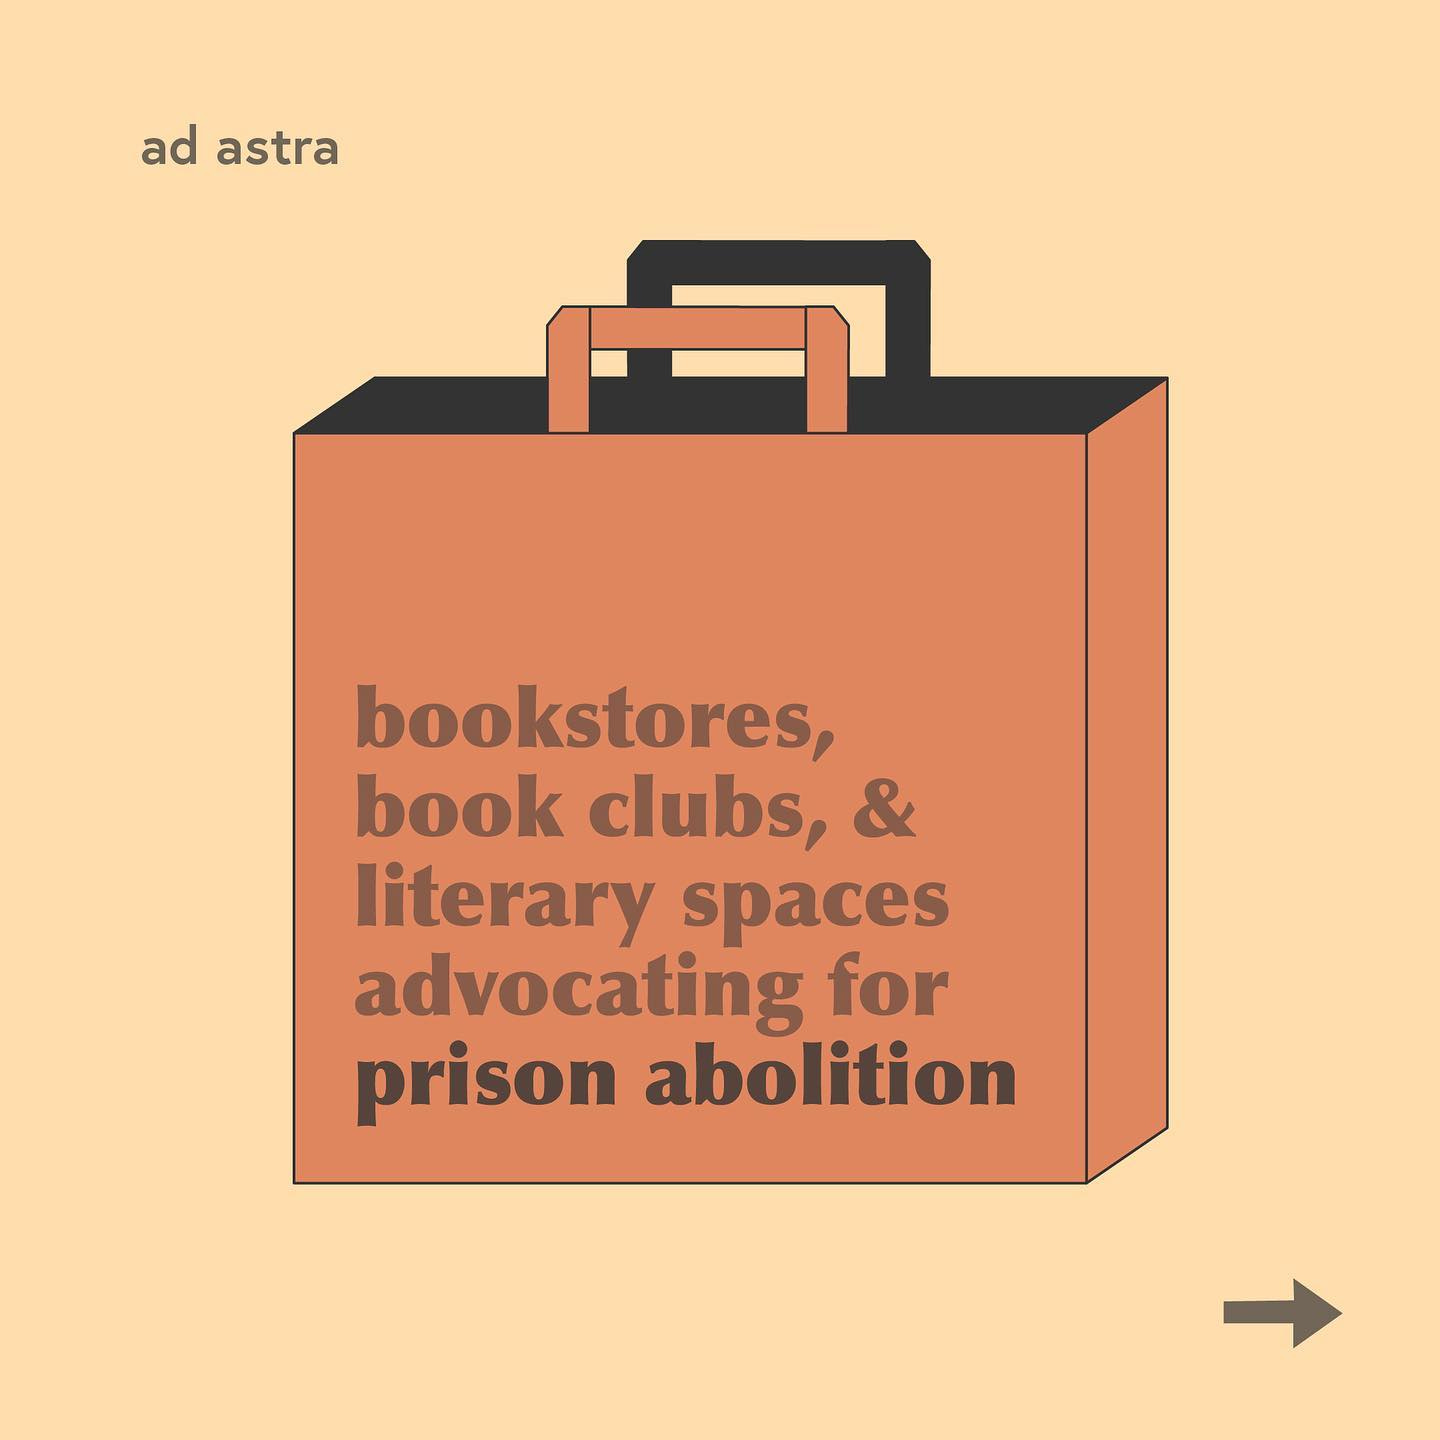 Bookstores, book clubs, & literary spaces advocating for prison abolition